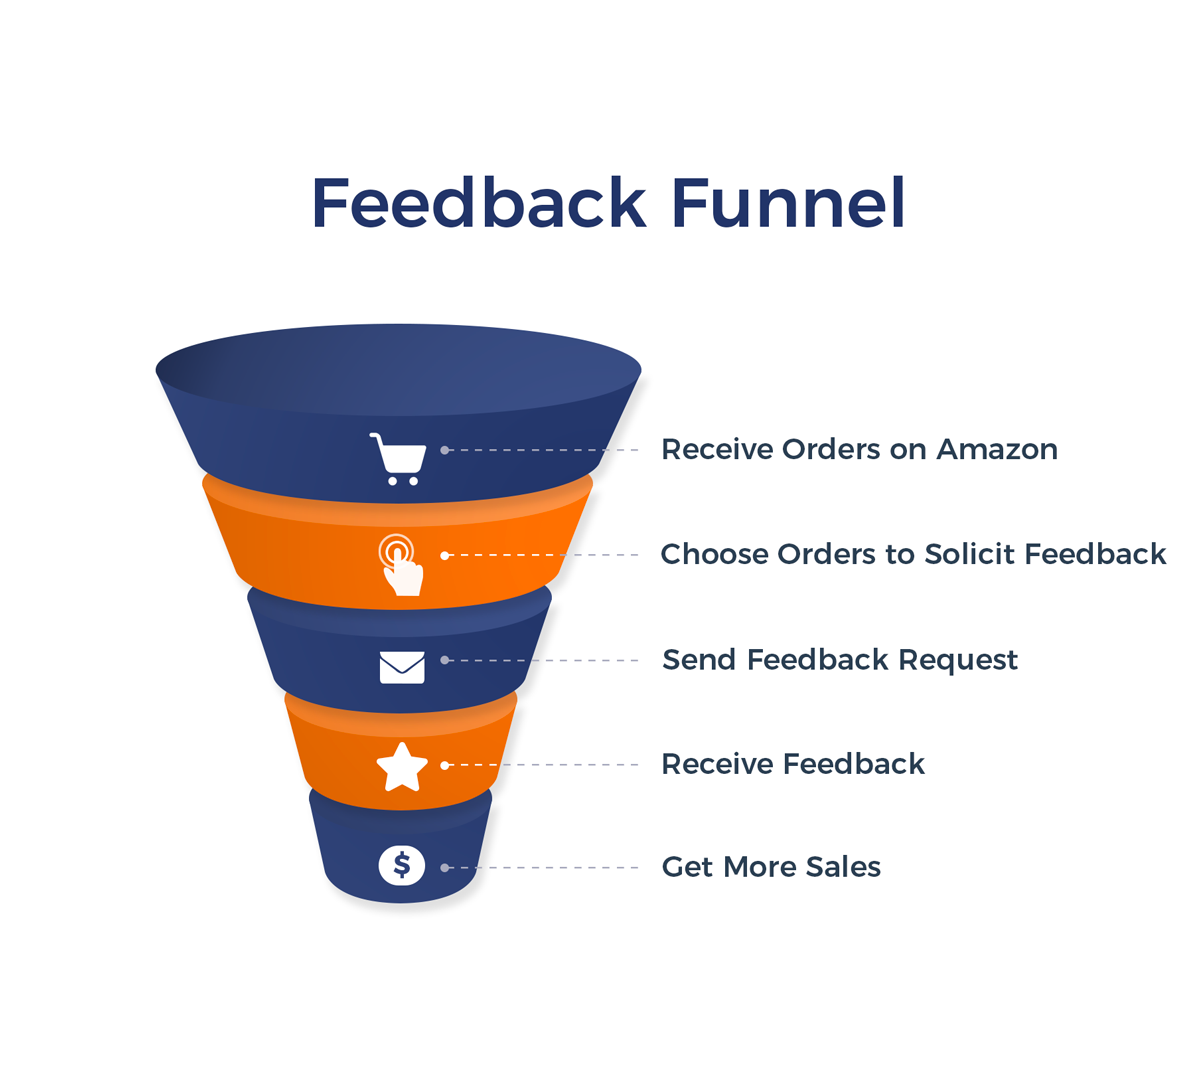 Illustration of an Amazon feedback funnel with icons and text, “Receive orders on Amazon, choose orders to solicit feedback, send feedback request, receive feedback, get more sales”